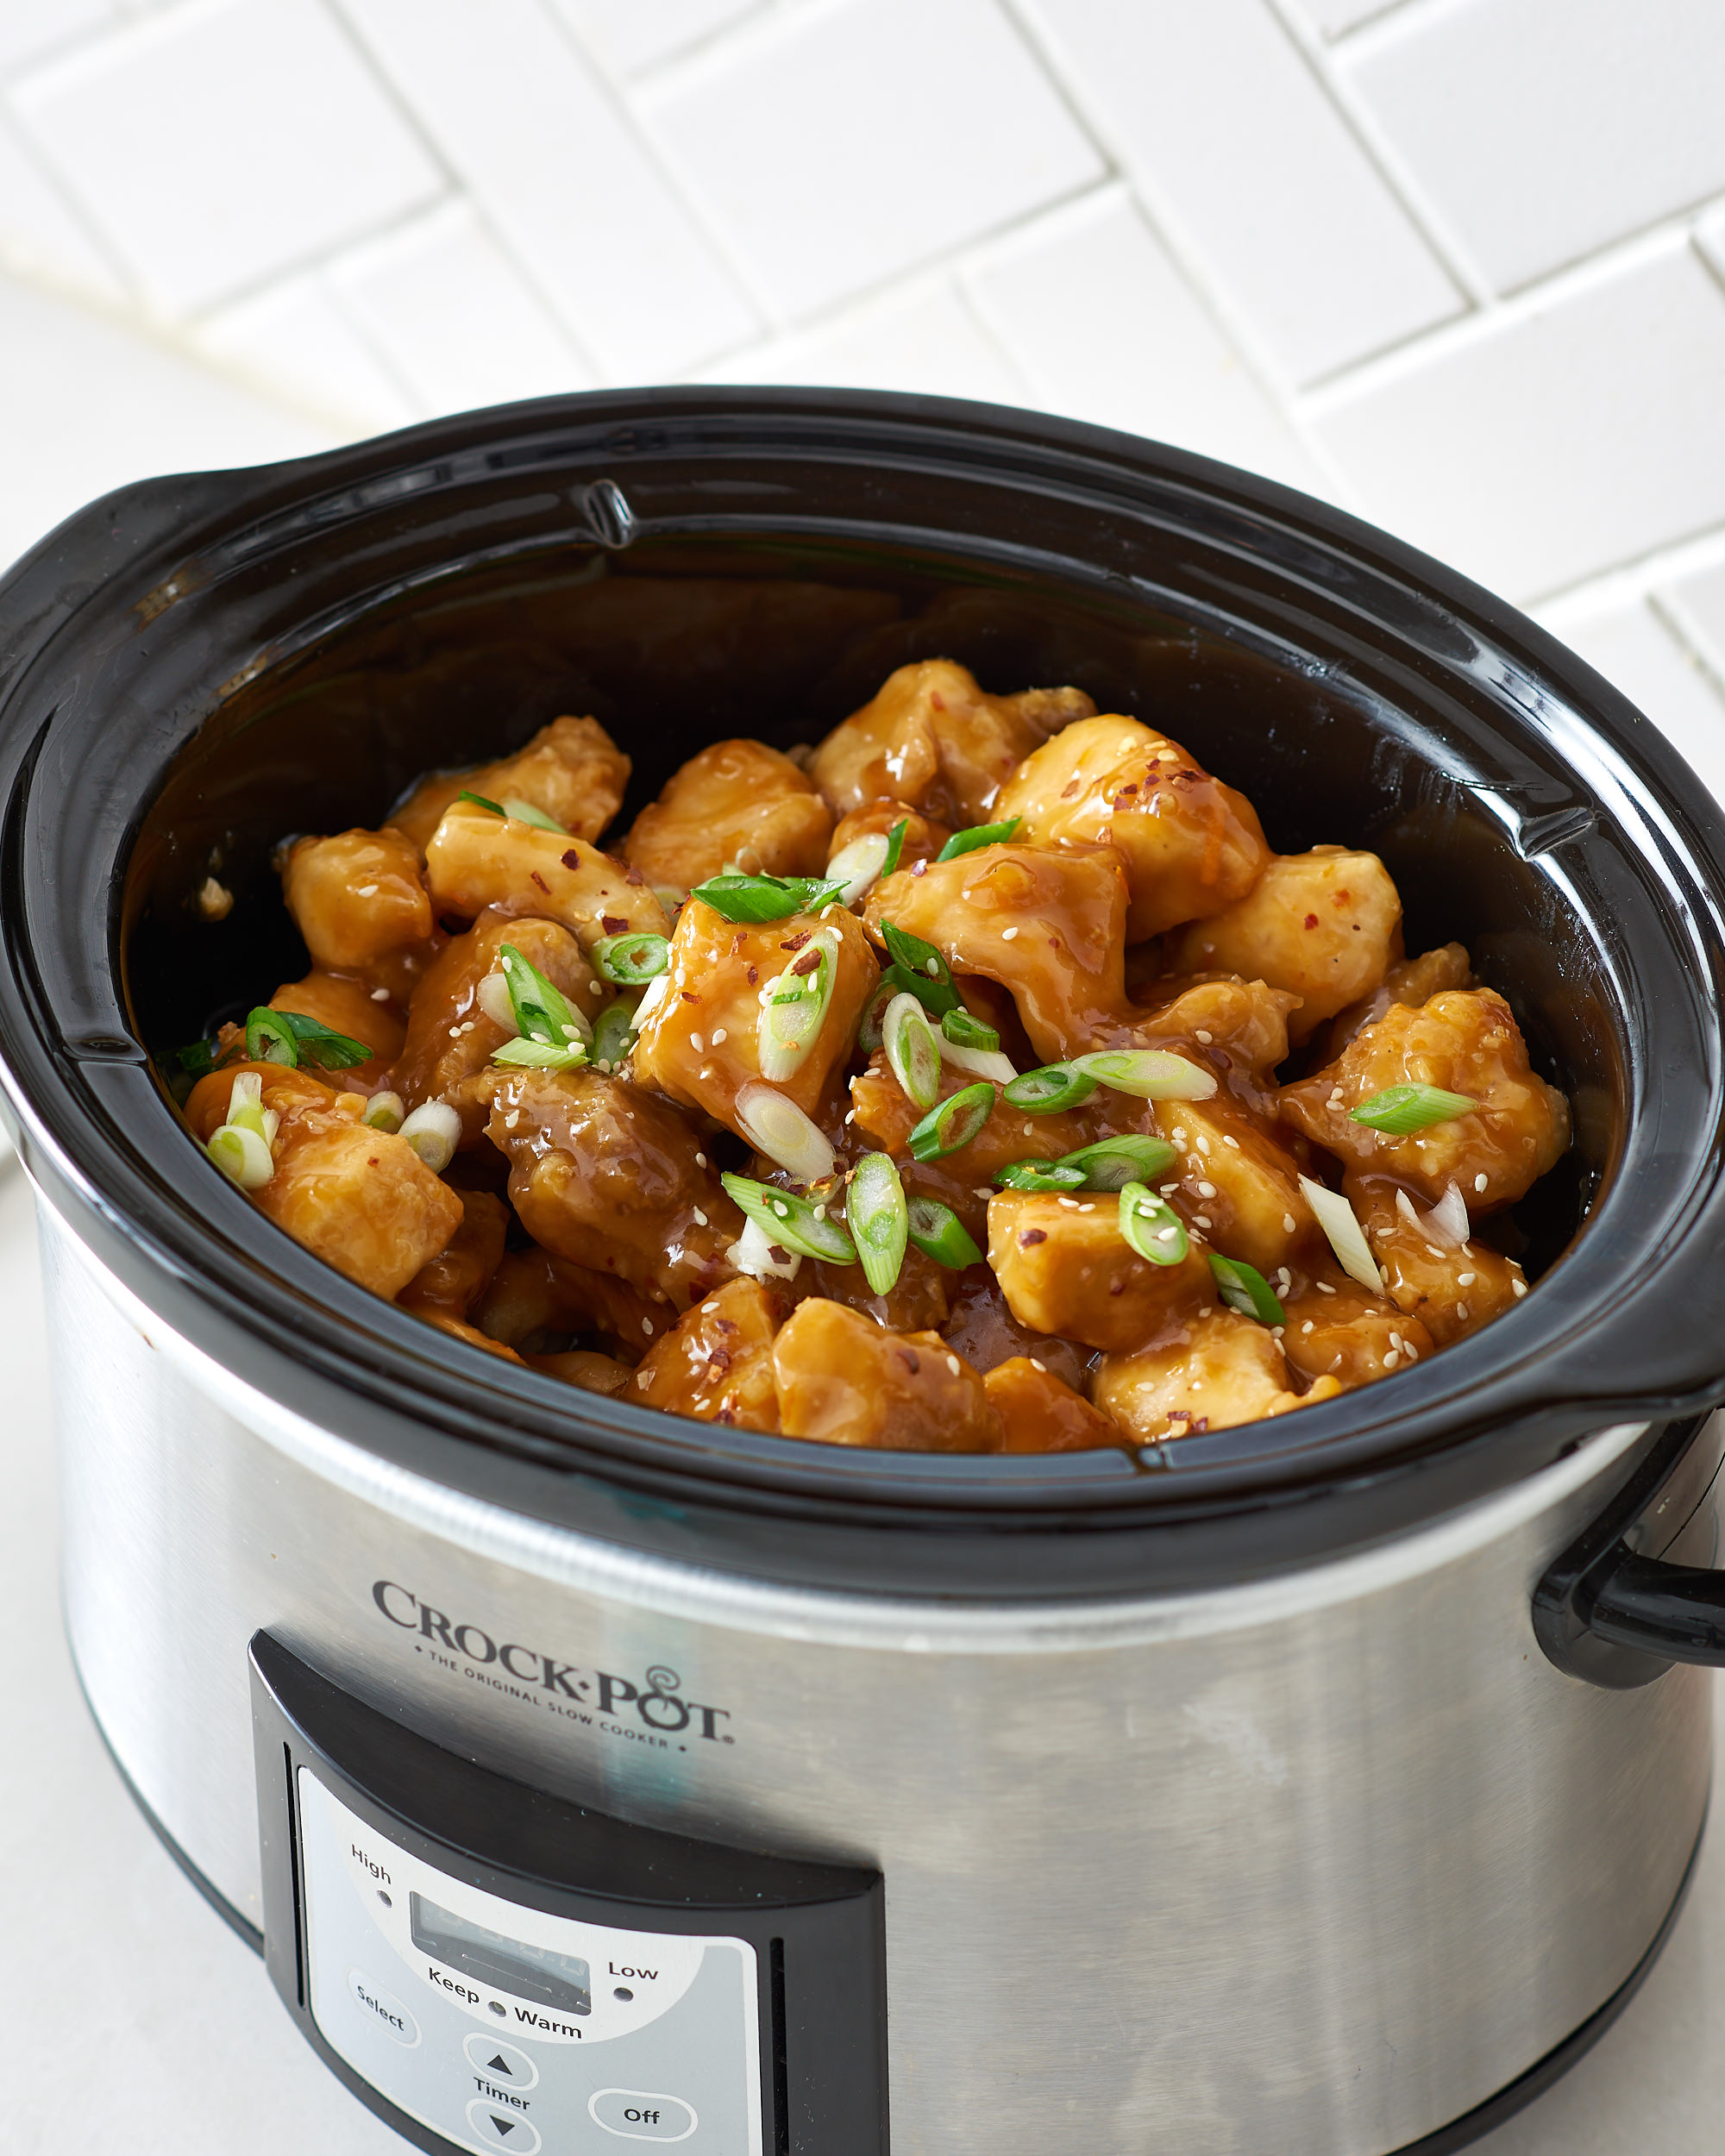 Most Popular Slow Cooker Recipes of 2018